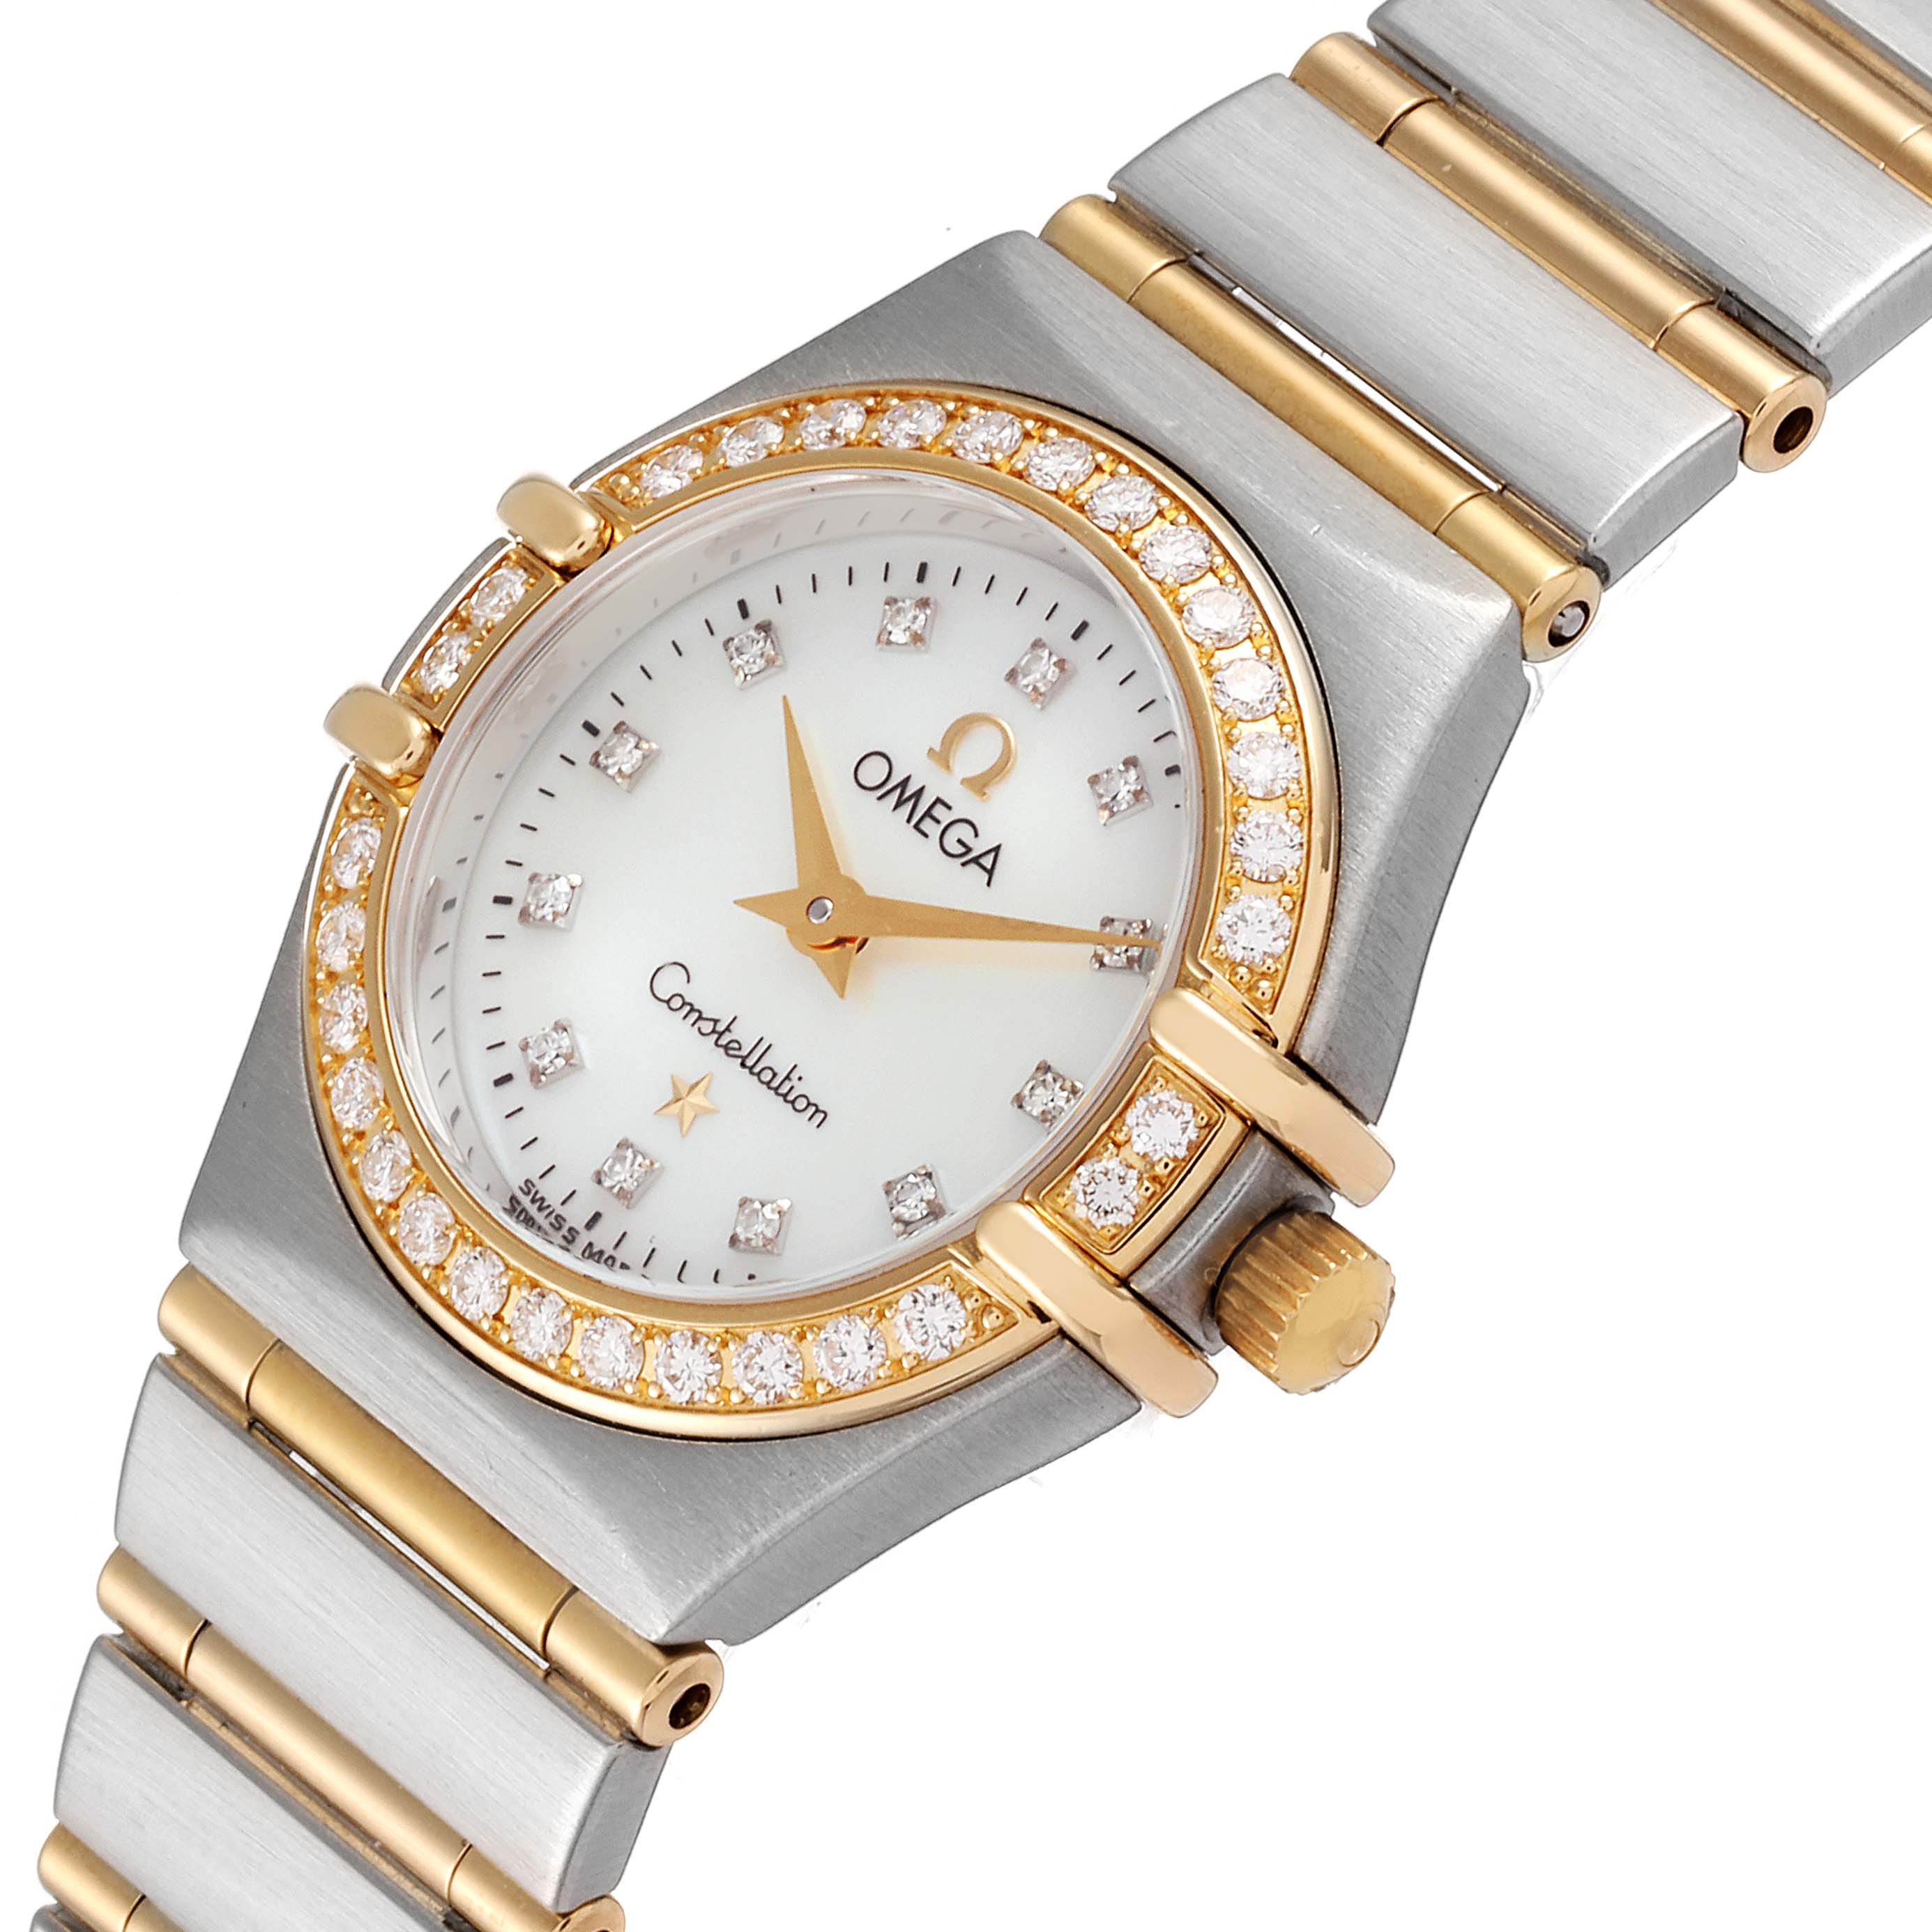 Omega Constellation 95 Mother of Pearl Diamond Watch 1267.75.00 Box ...